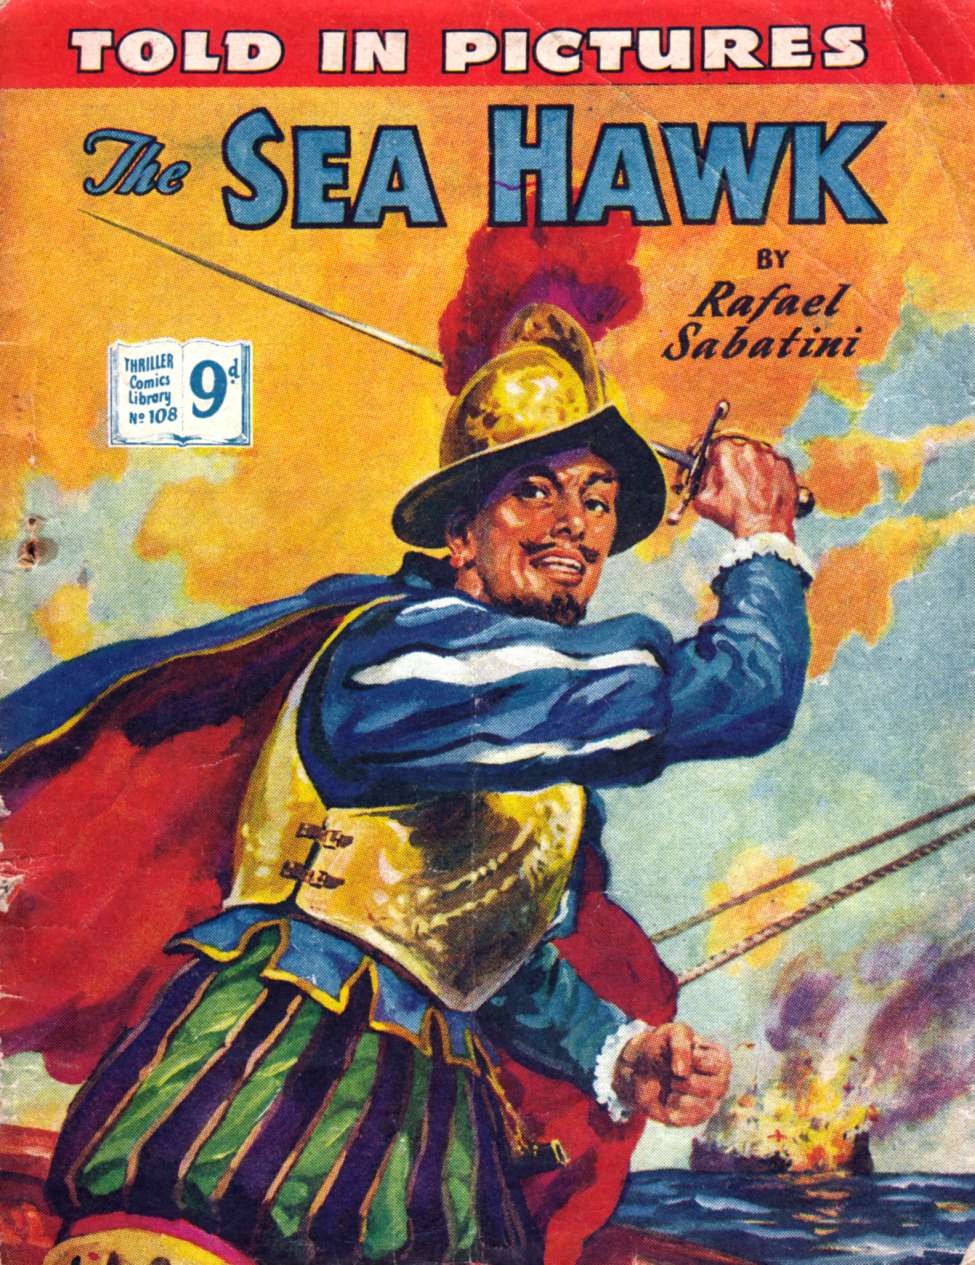 Book Cover For Thriller Comics Library 108 - The Sea Hawk